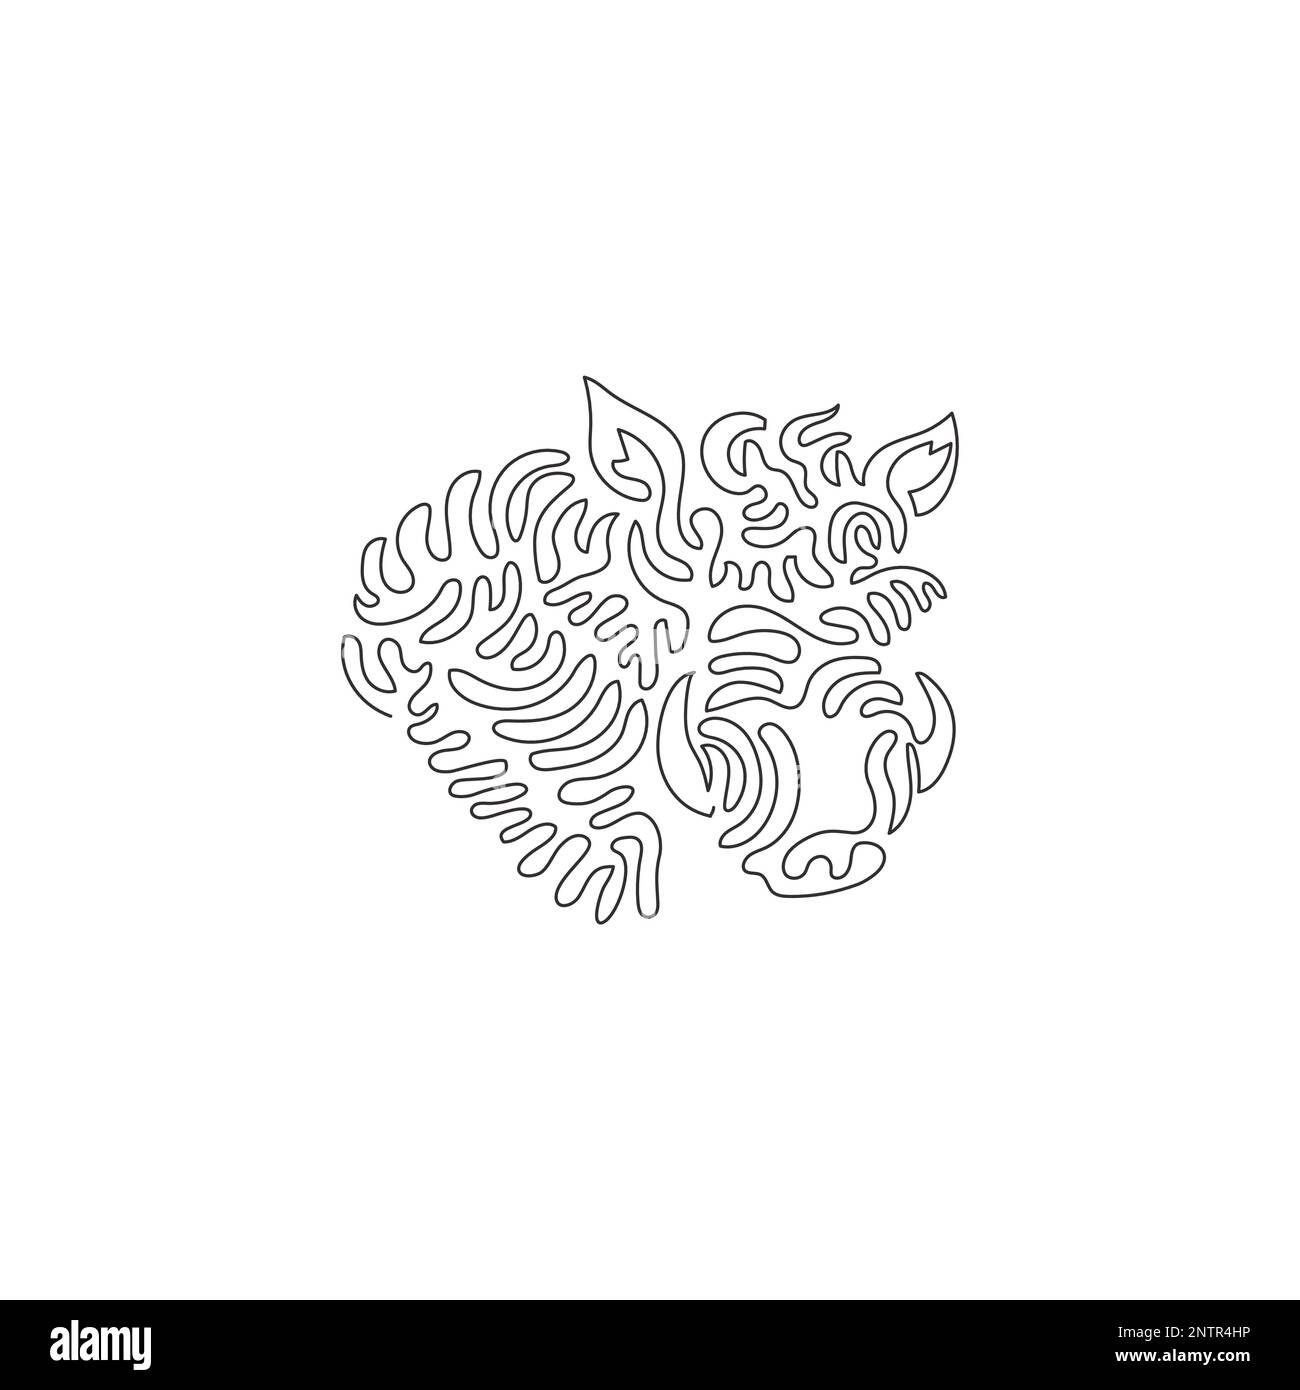 Single one line drawing of ugly face warthog abstract art. Continuous line drawing design vector illustration of warthogs have two sets of tusks Stock Vector